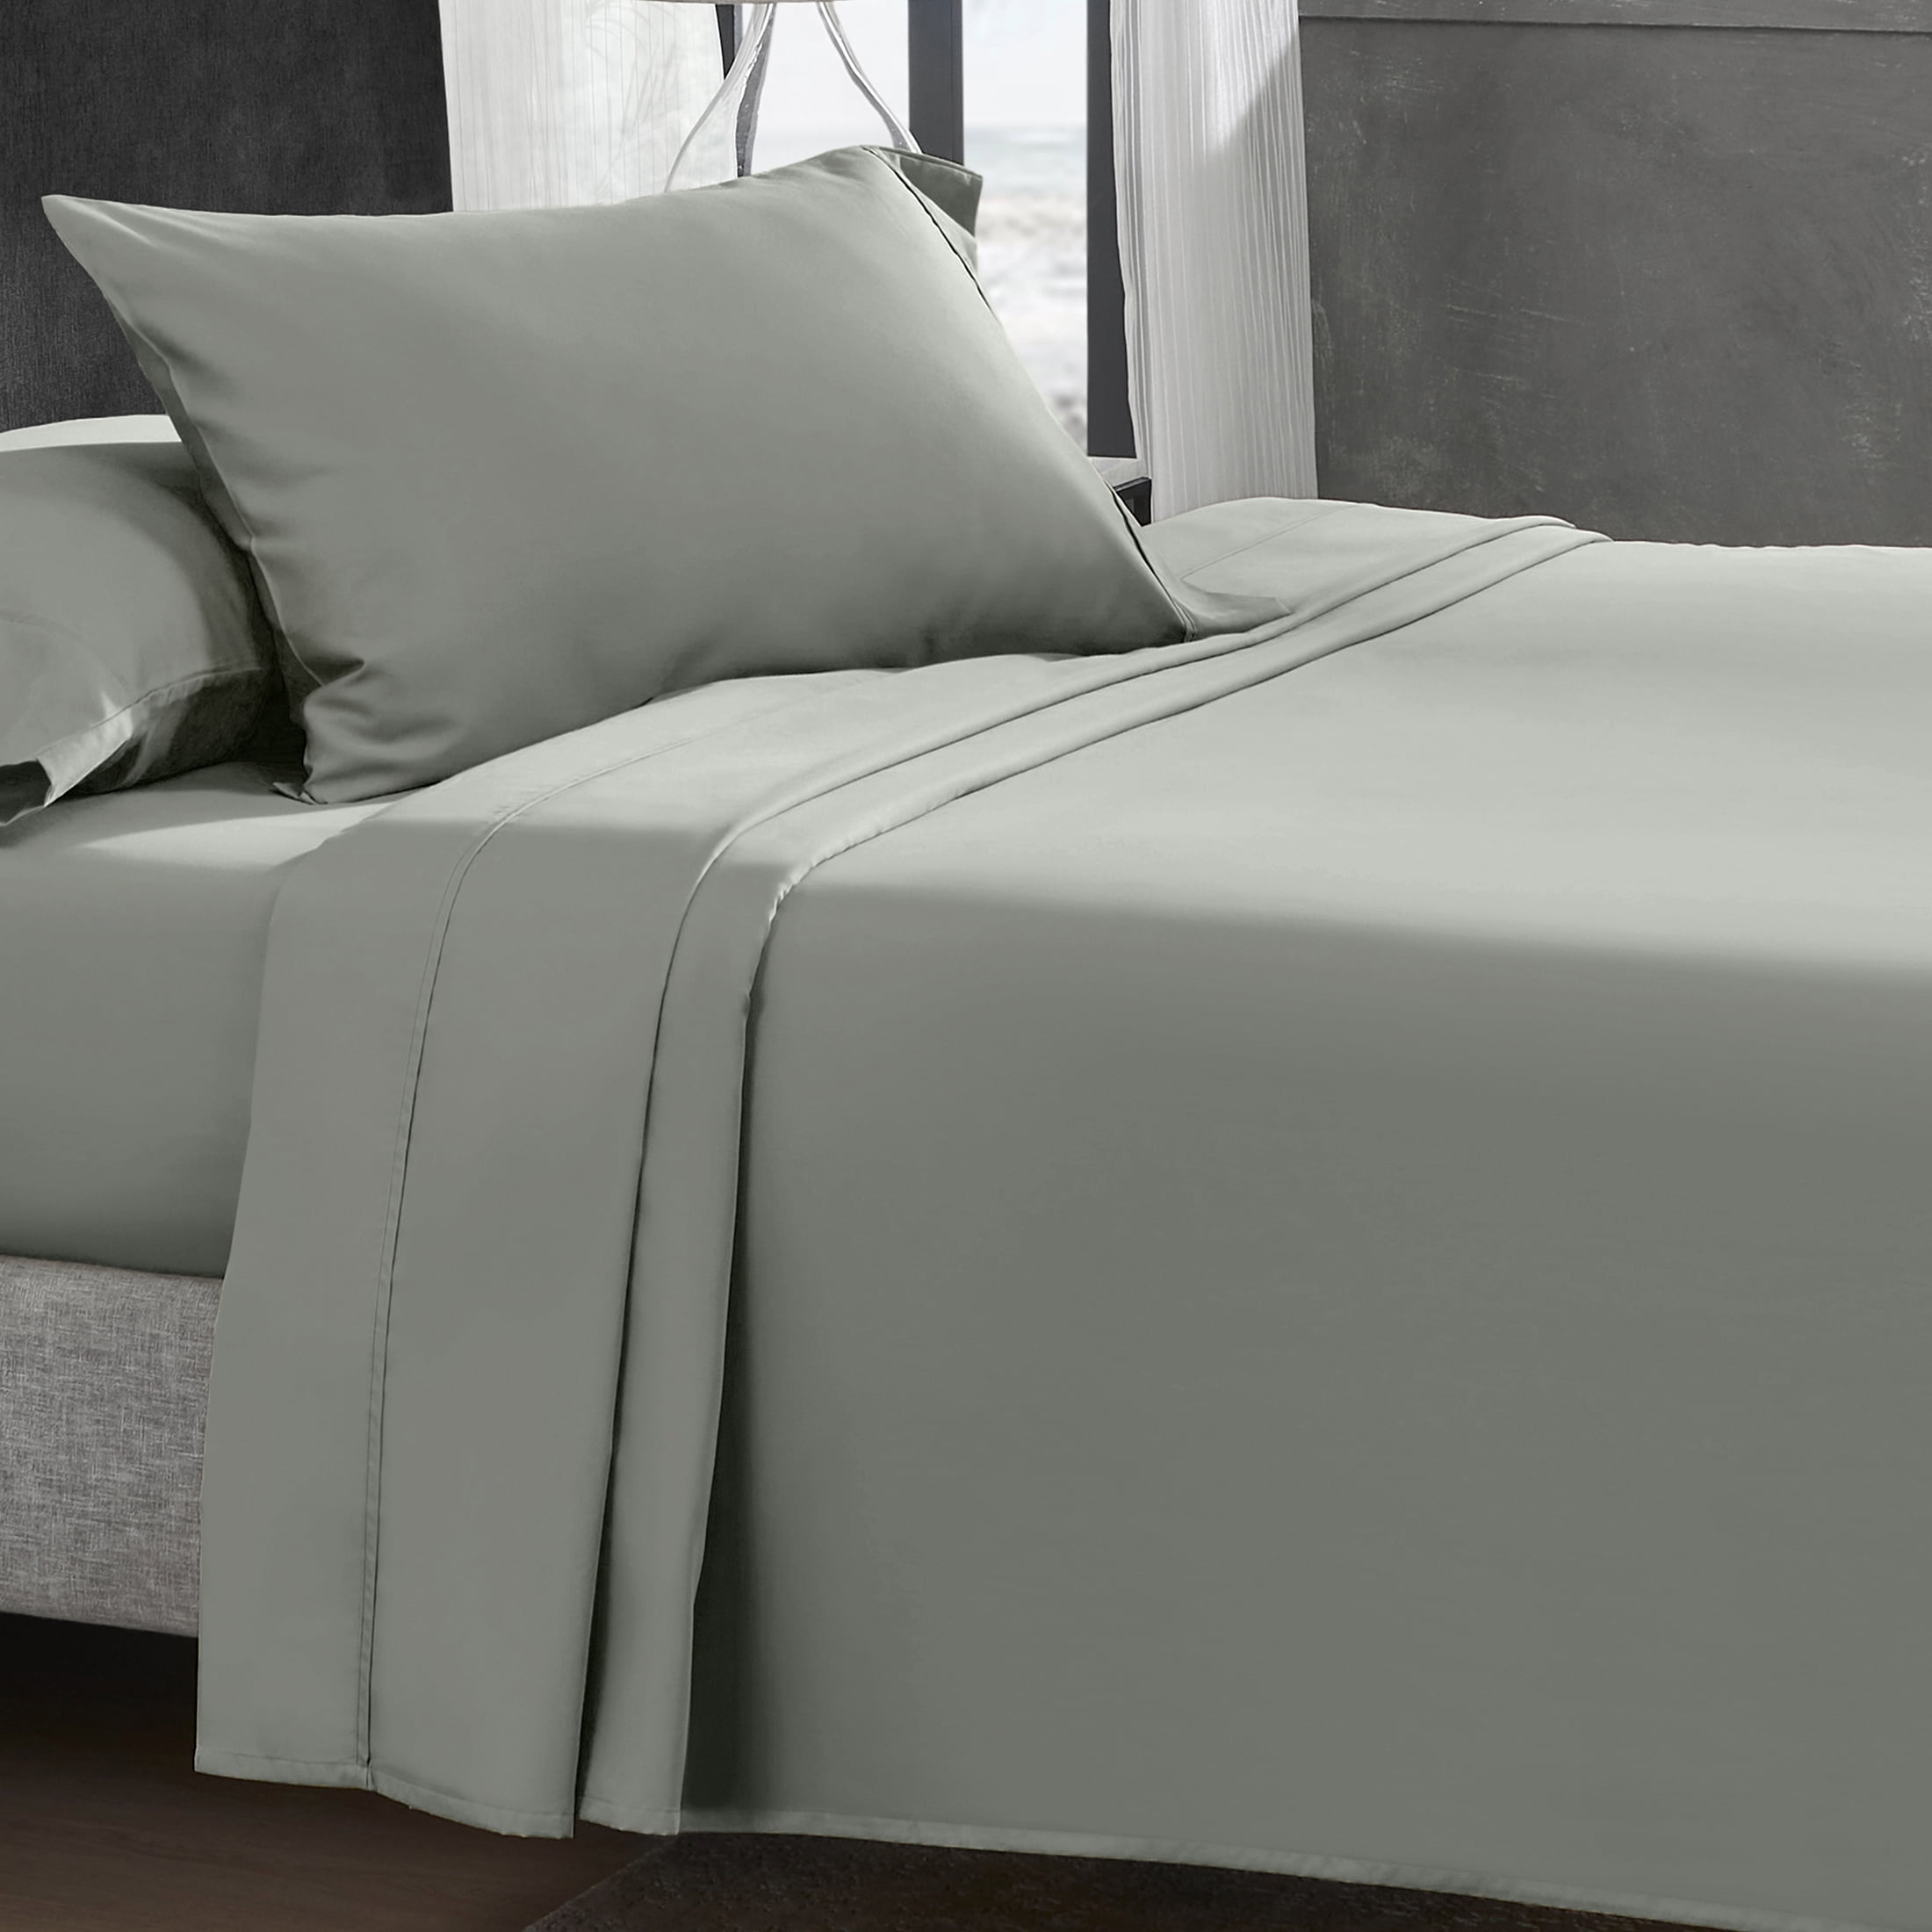 Details about   Cushy Bedding Fitted Sheet Deep Pocket Egyptian Cotton US Full XL Size All Color 